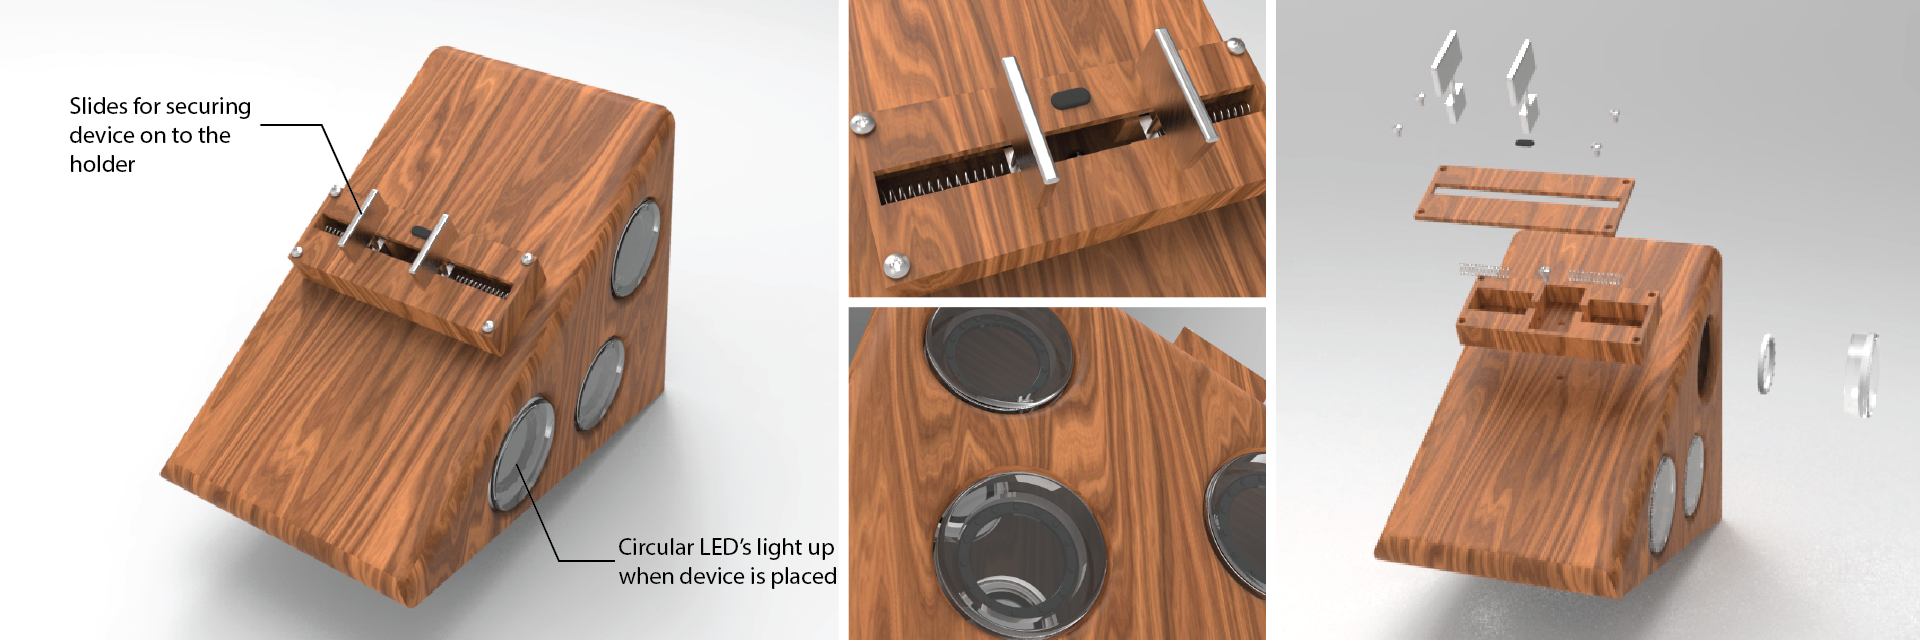 Renders of a wooden phone holder/amplifier. 